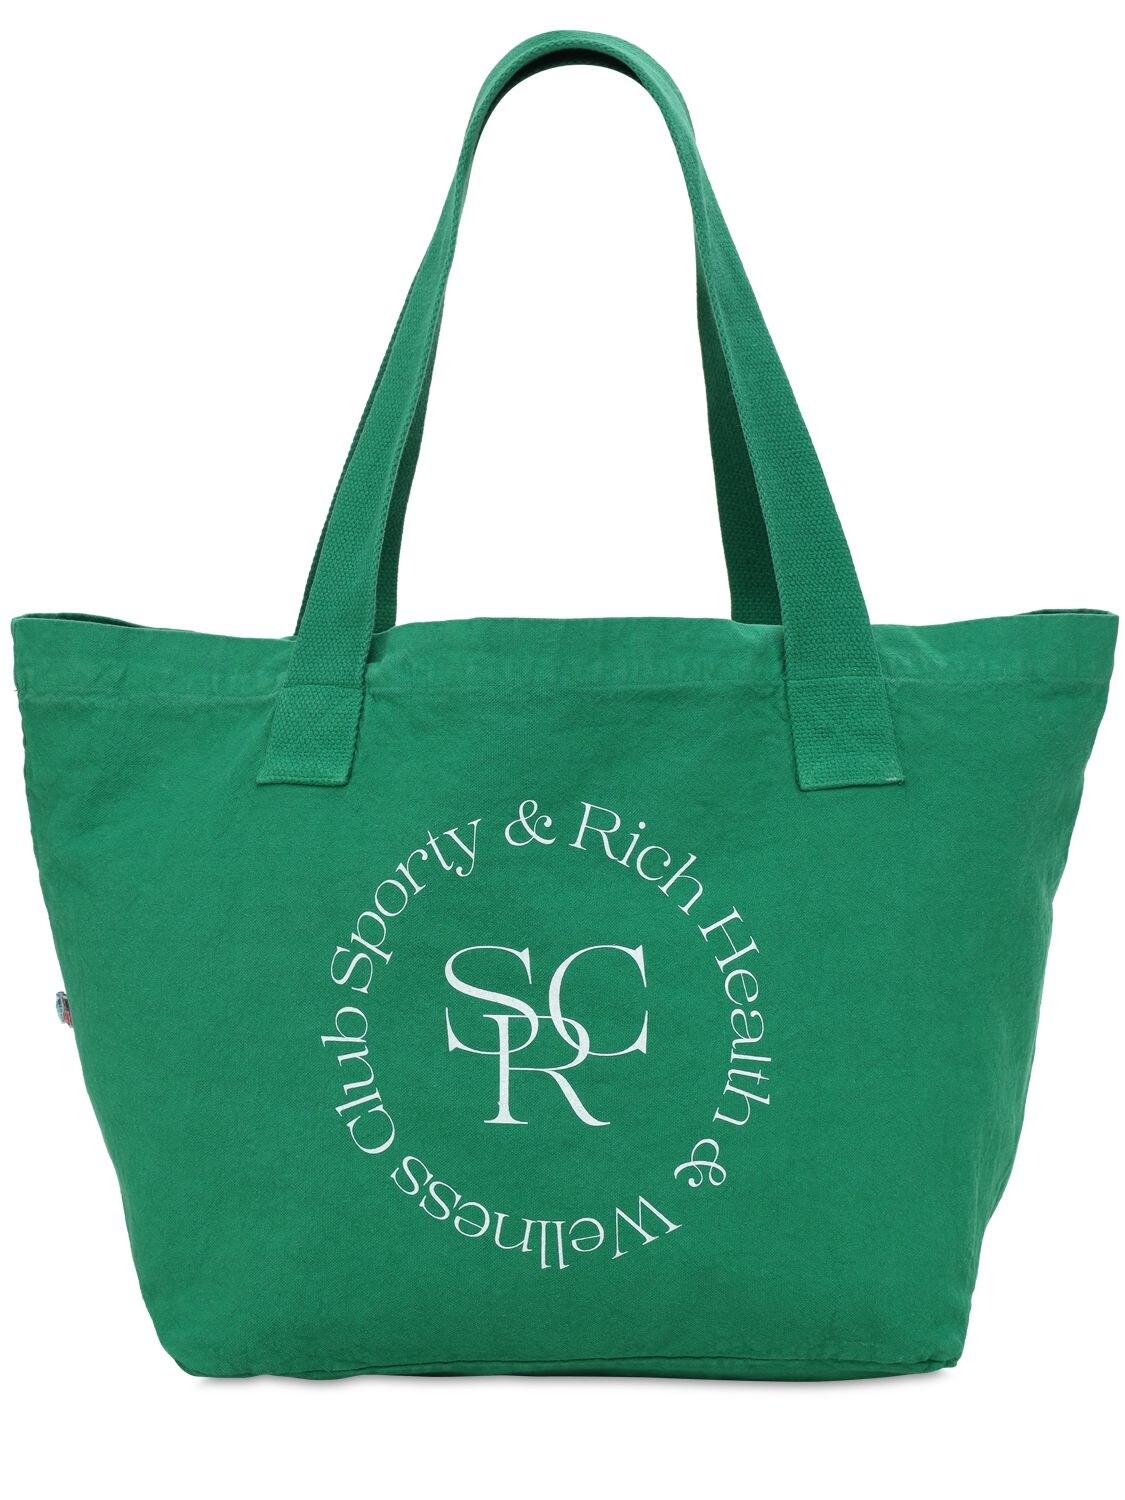 Sporty & Rich Asics Collab Cotton Tote Bag in Green | Lyst